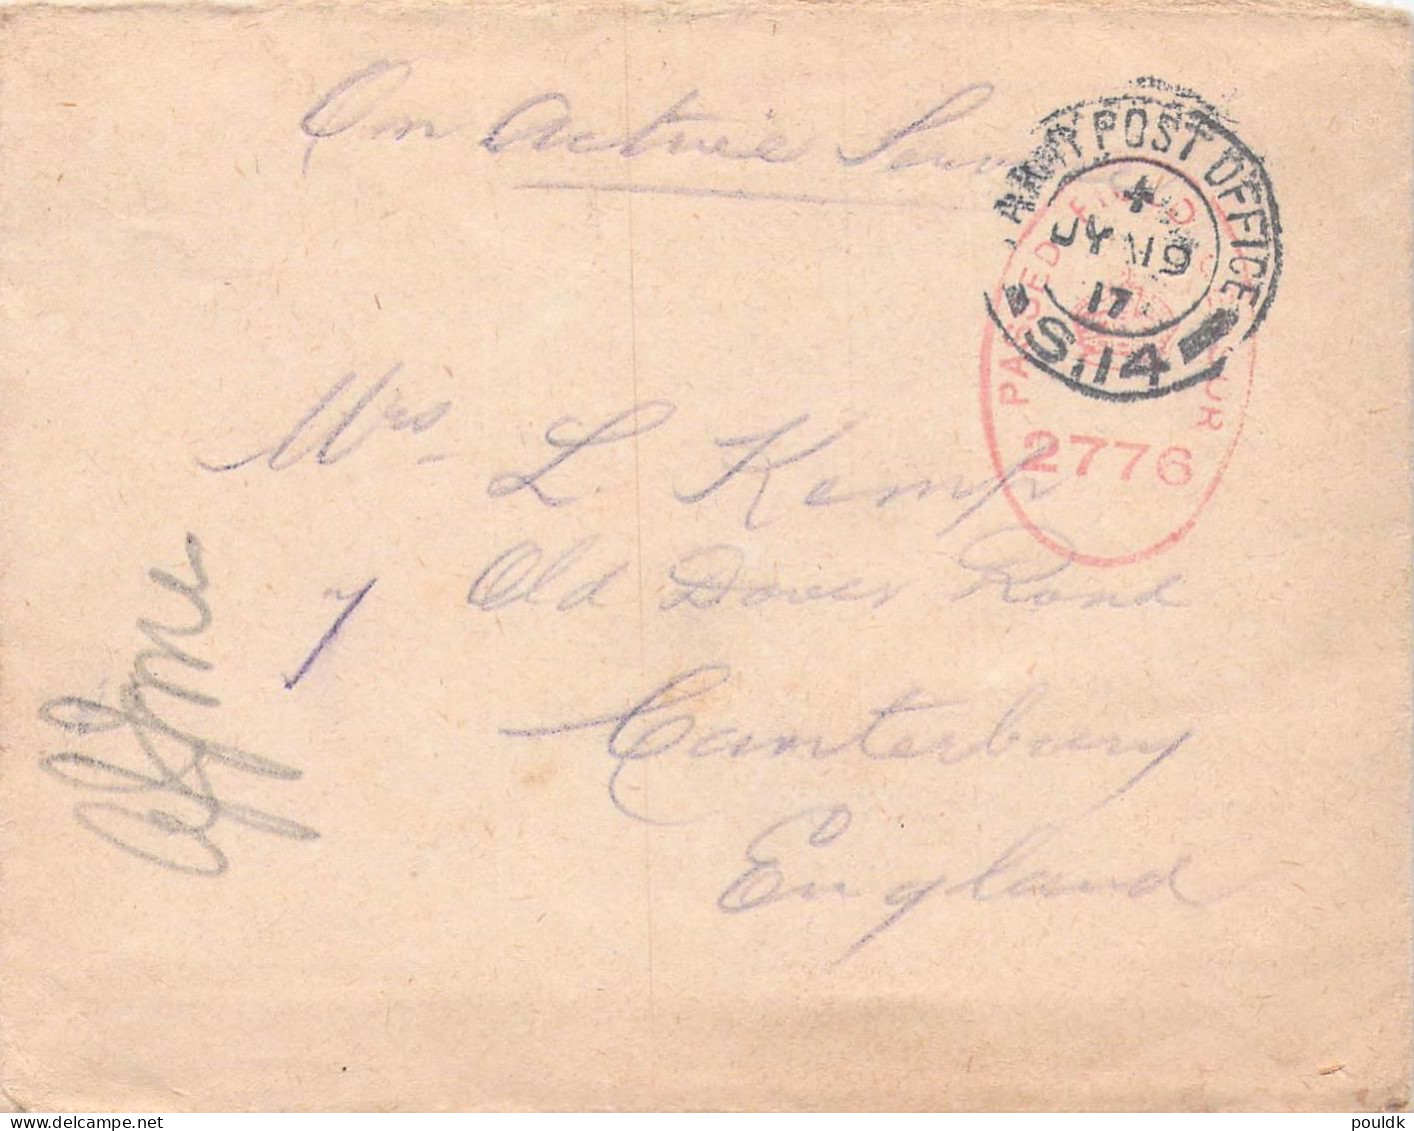 British Field Post WW 1 From Calais, France - Unit Located Around Calais Censored CM5 Cover Posted Army Post Office S.14 - Militaria